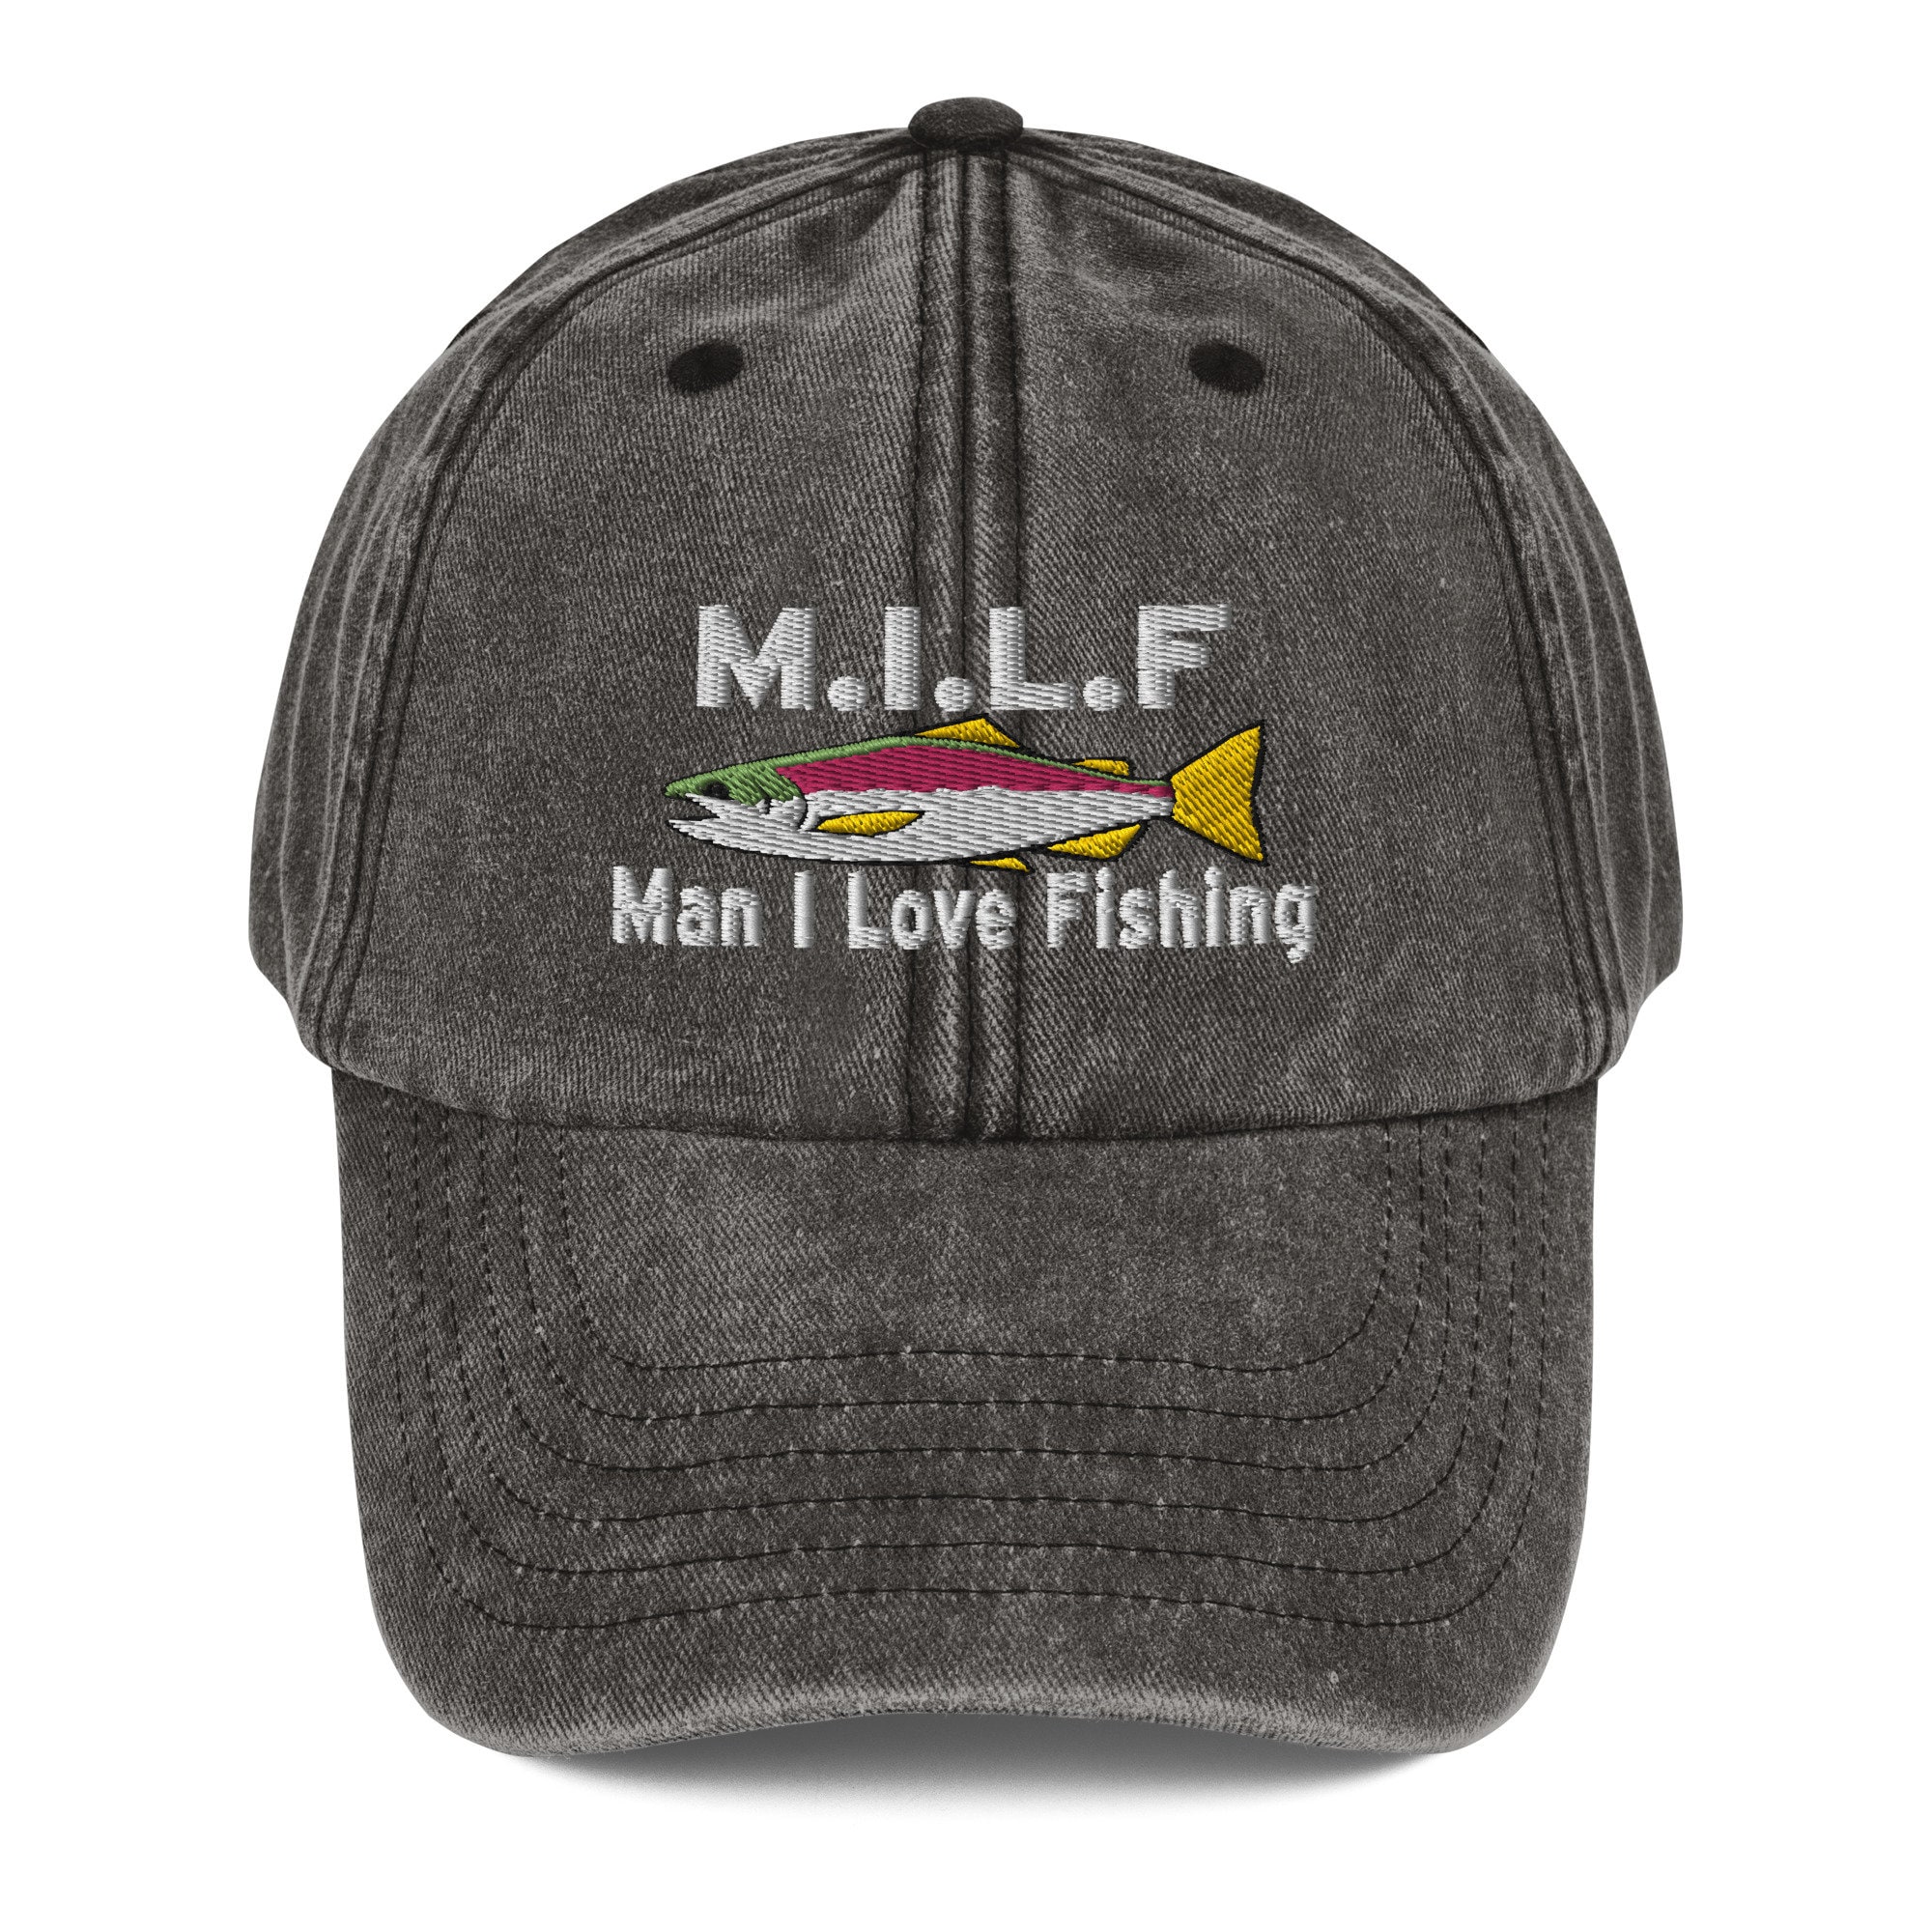 MILF, Man I love Fishing Hat (Embroidered Vintage Hat), Funny Fishing Gift